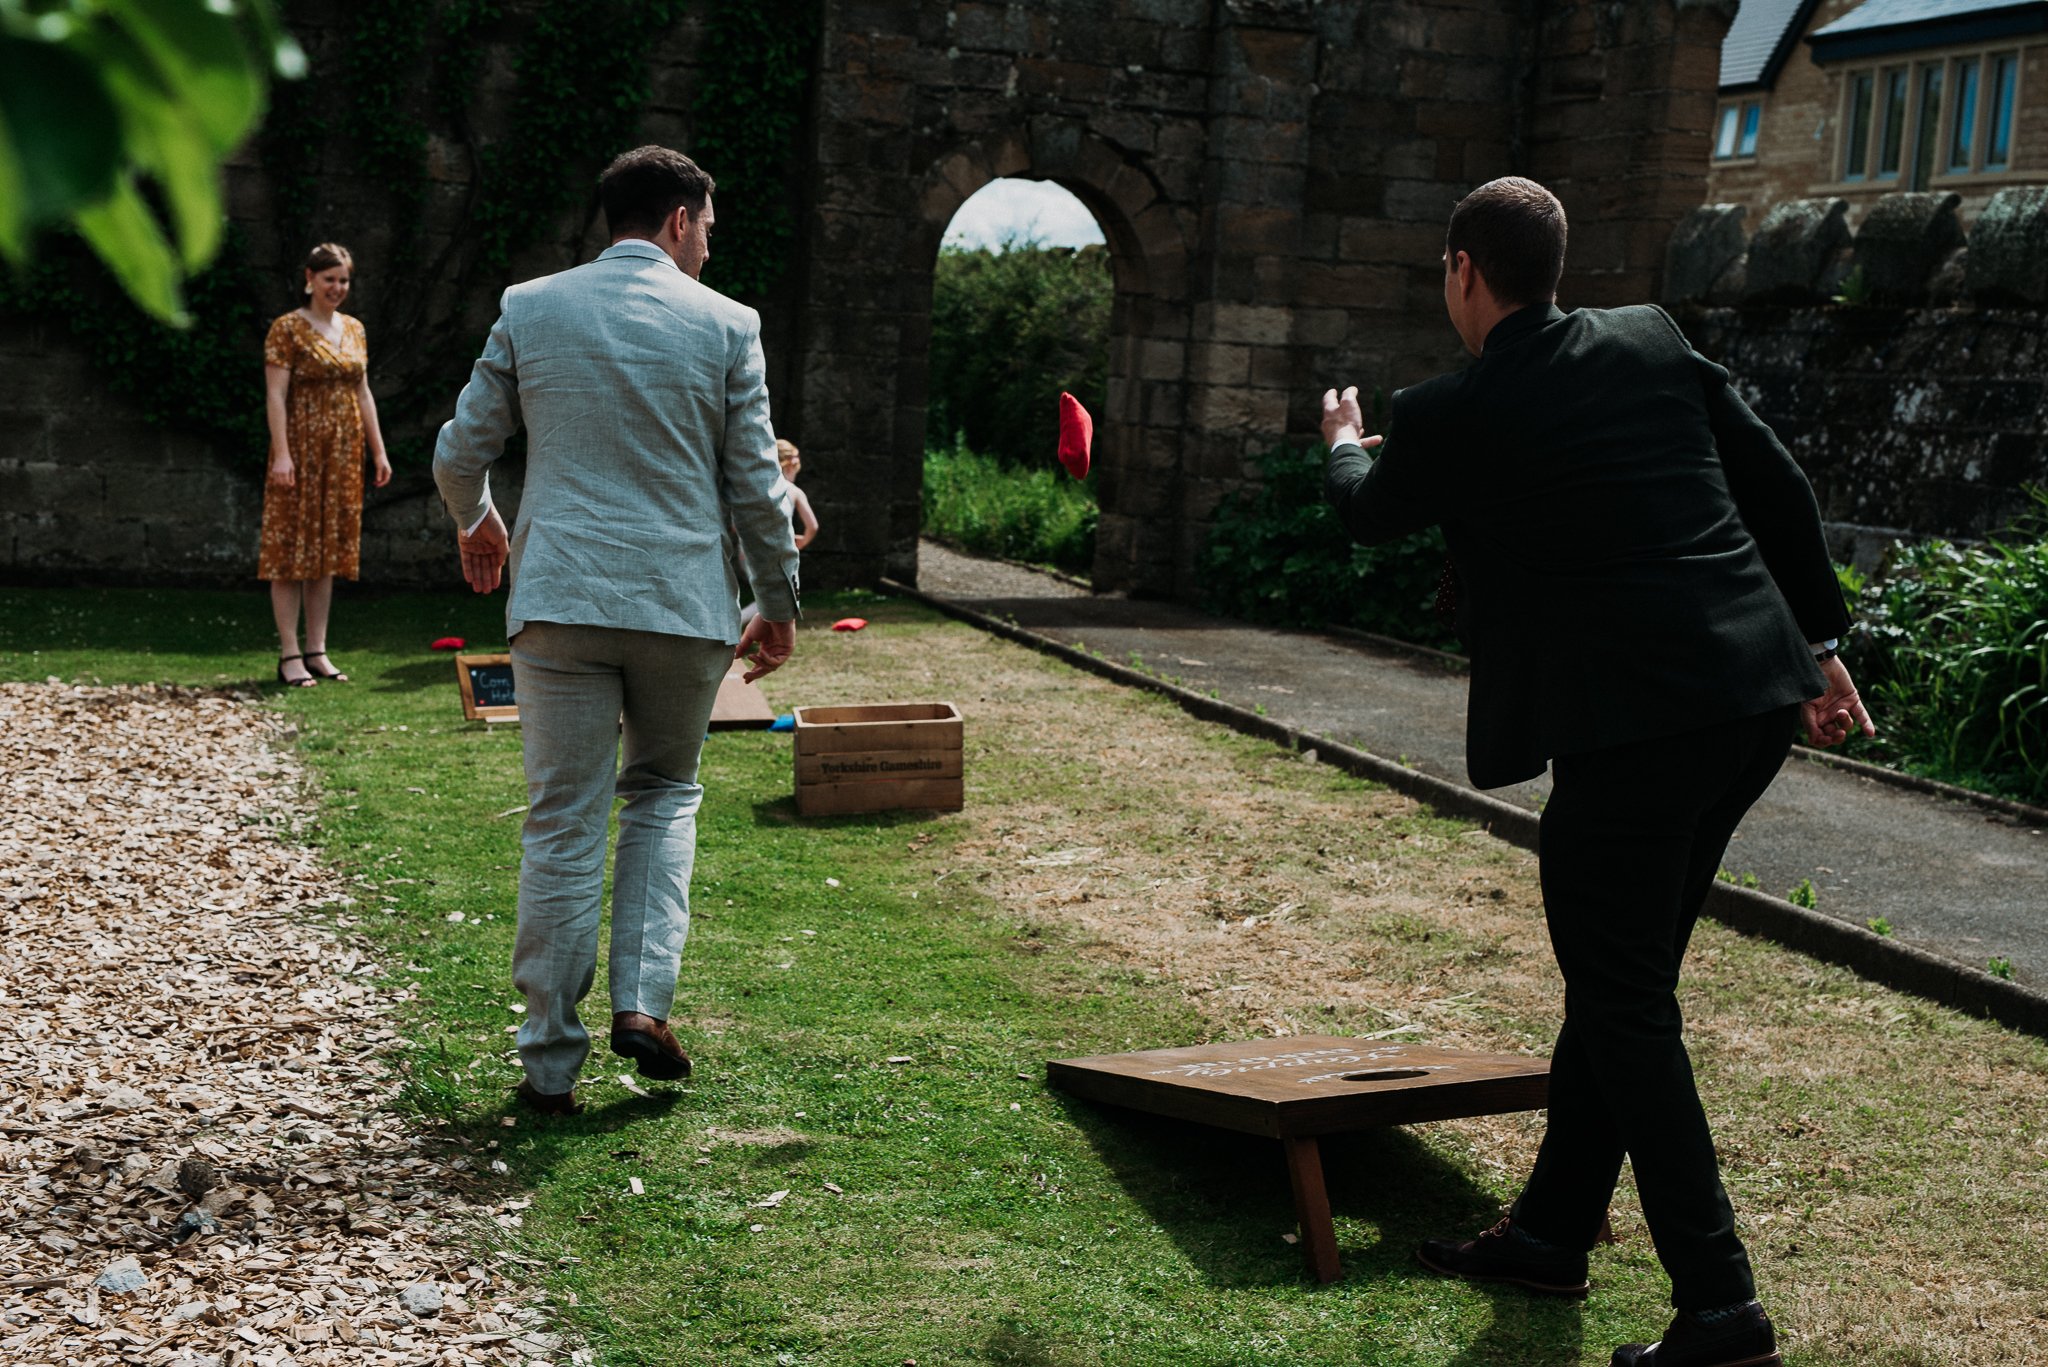 Guests playing corn hole lawn games at the wedding at Sneaton Castle, North Yorkshire.